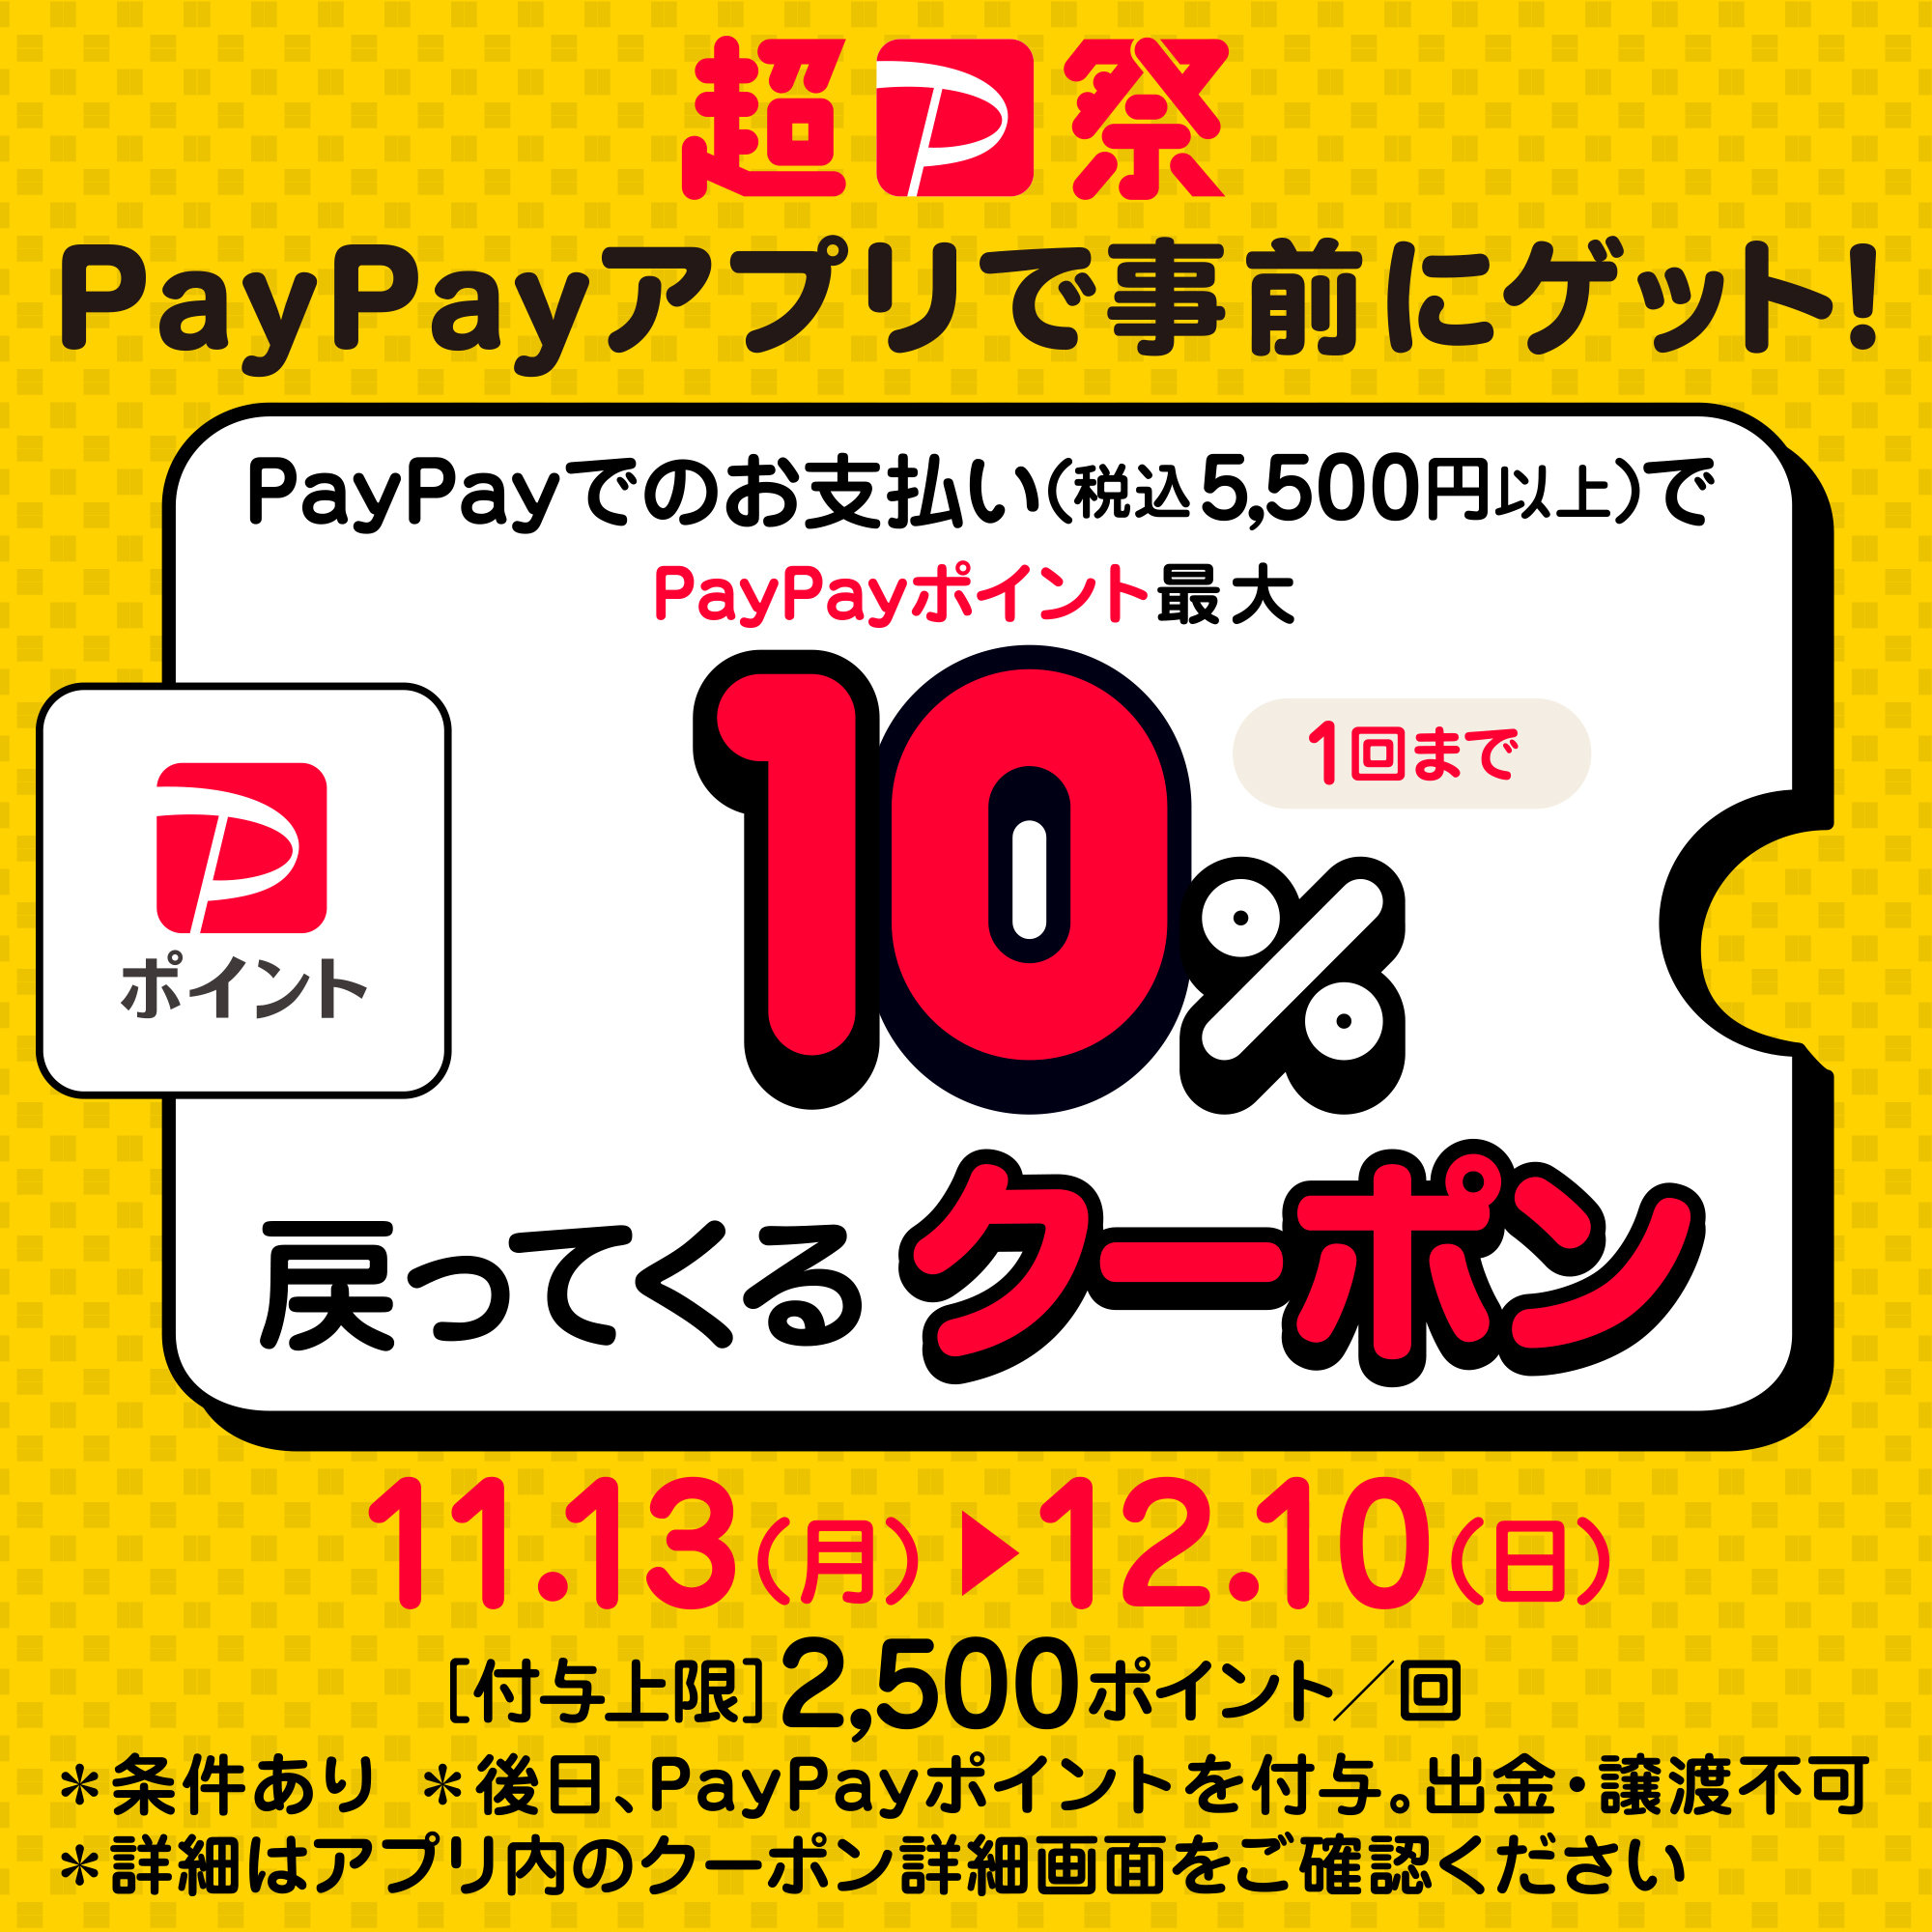 ■PayPay